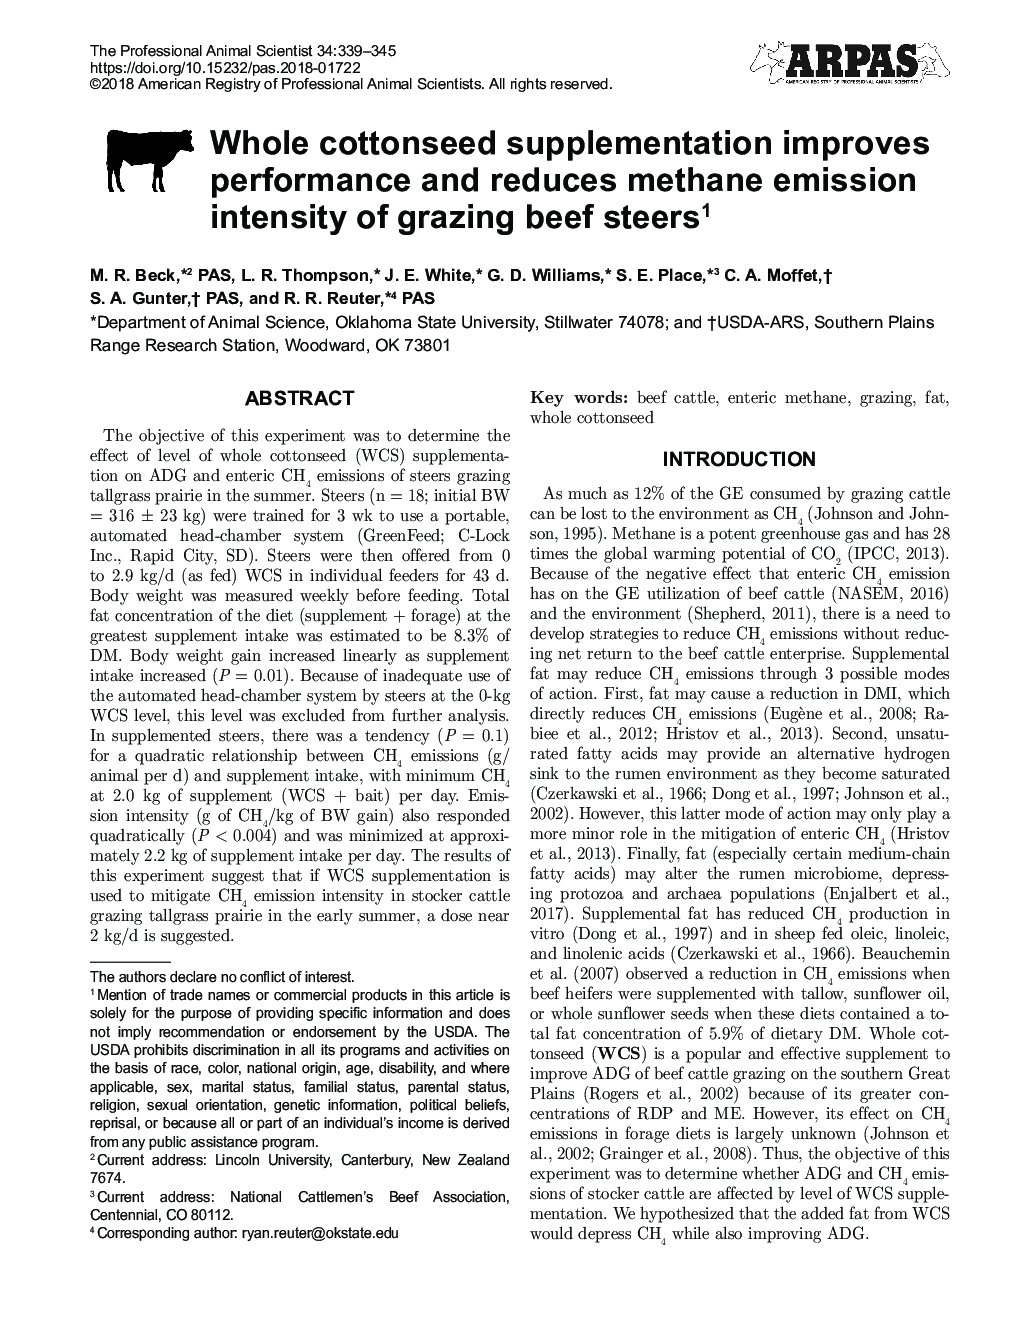 Whole cottonseed supplementation improves performance and reduces methane emission intensity of grazing beef steers1